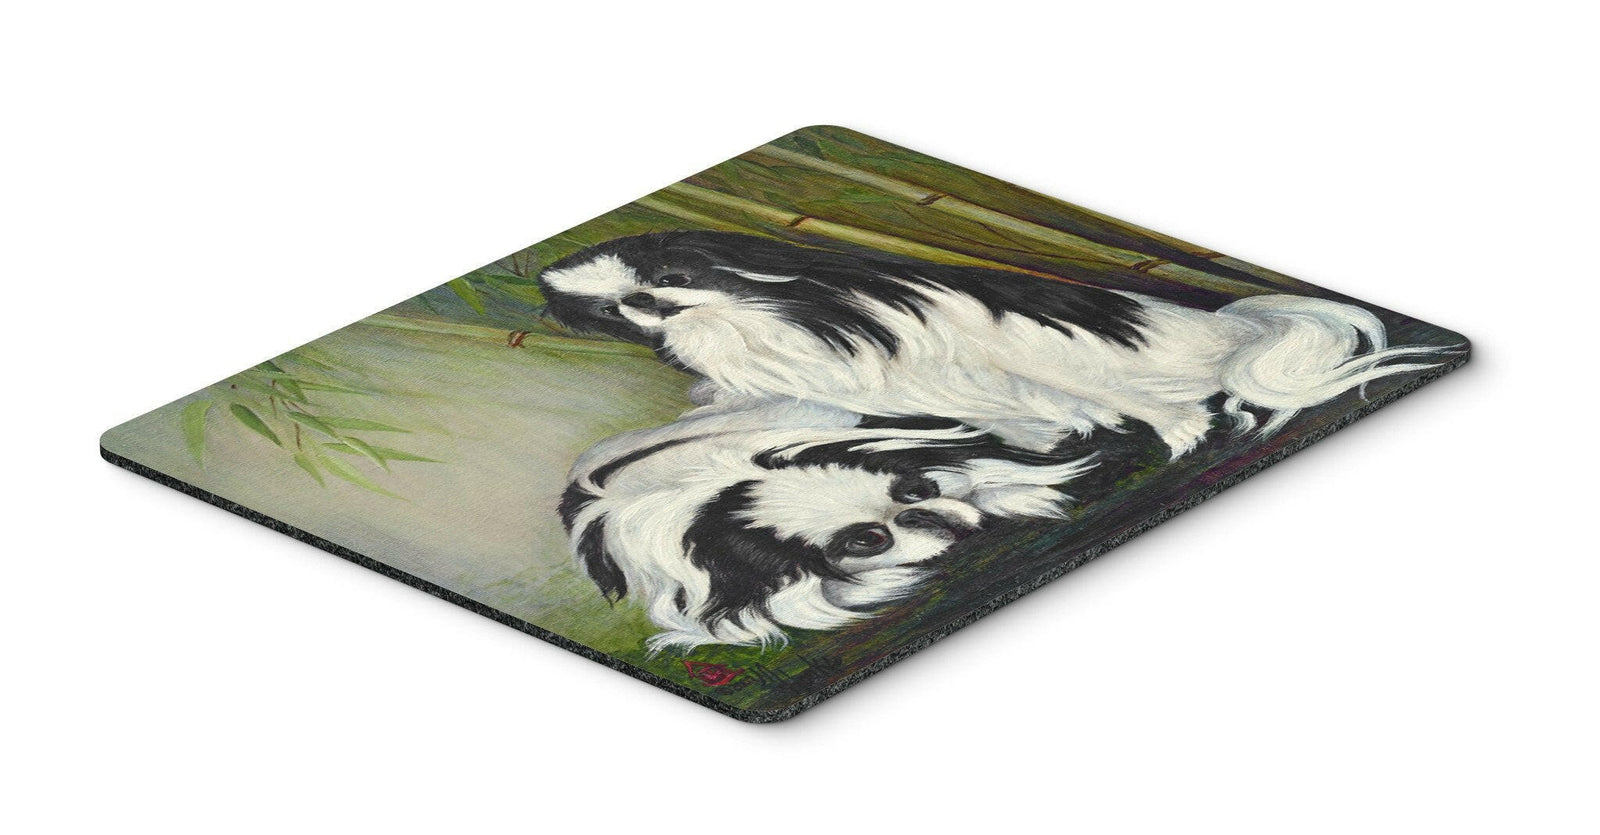 Japanese Chin Bamboo Garden Mouse Pad, Hot Pad or Trivet MH1044MP by Caroline's Treasures